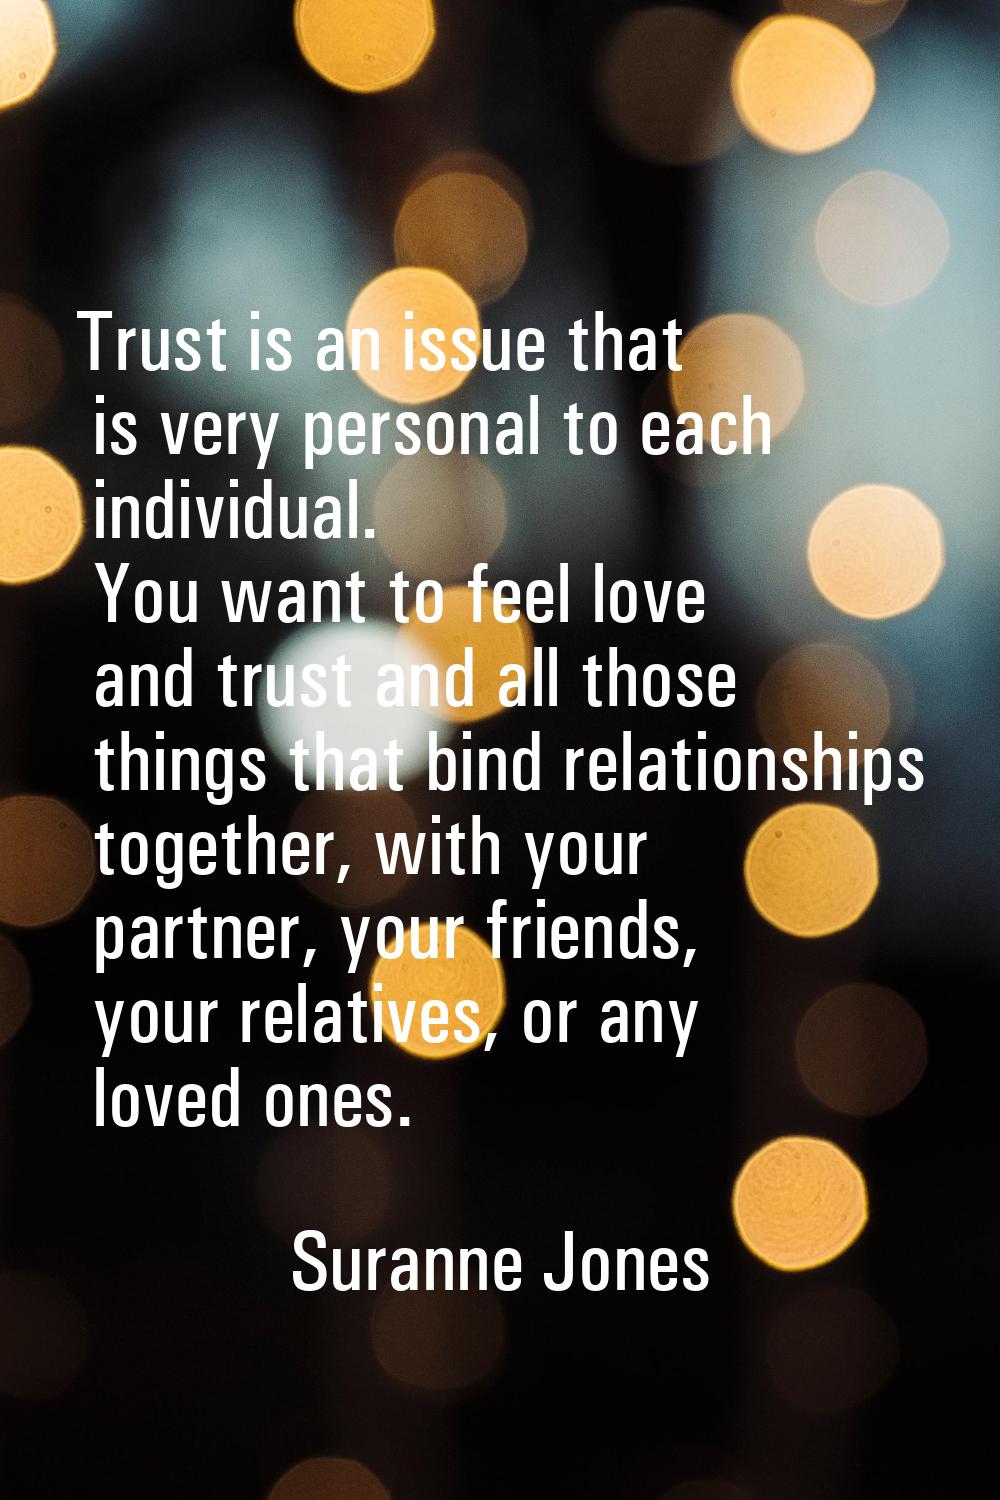 Trust is an issue that is very personal to each individual. You want to feel love and trust and all